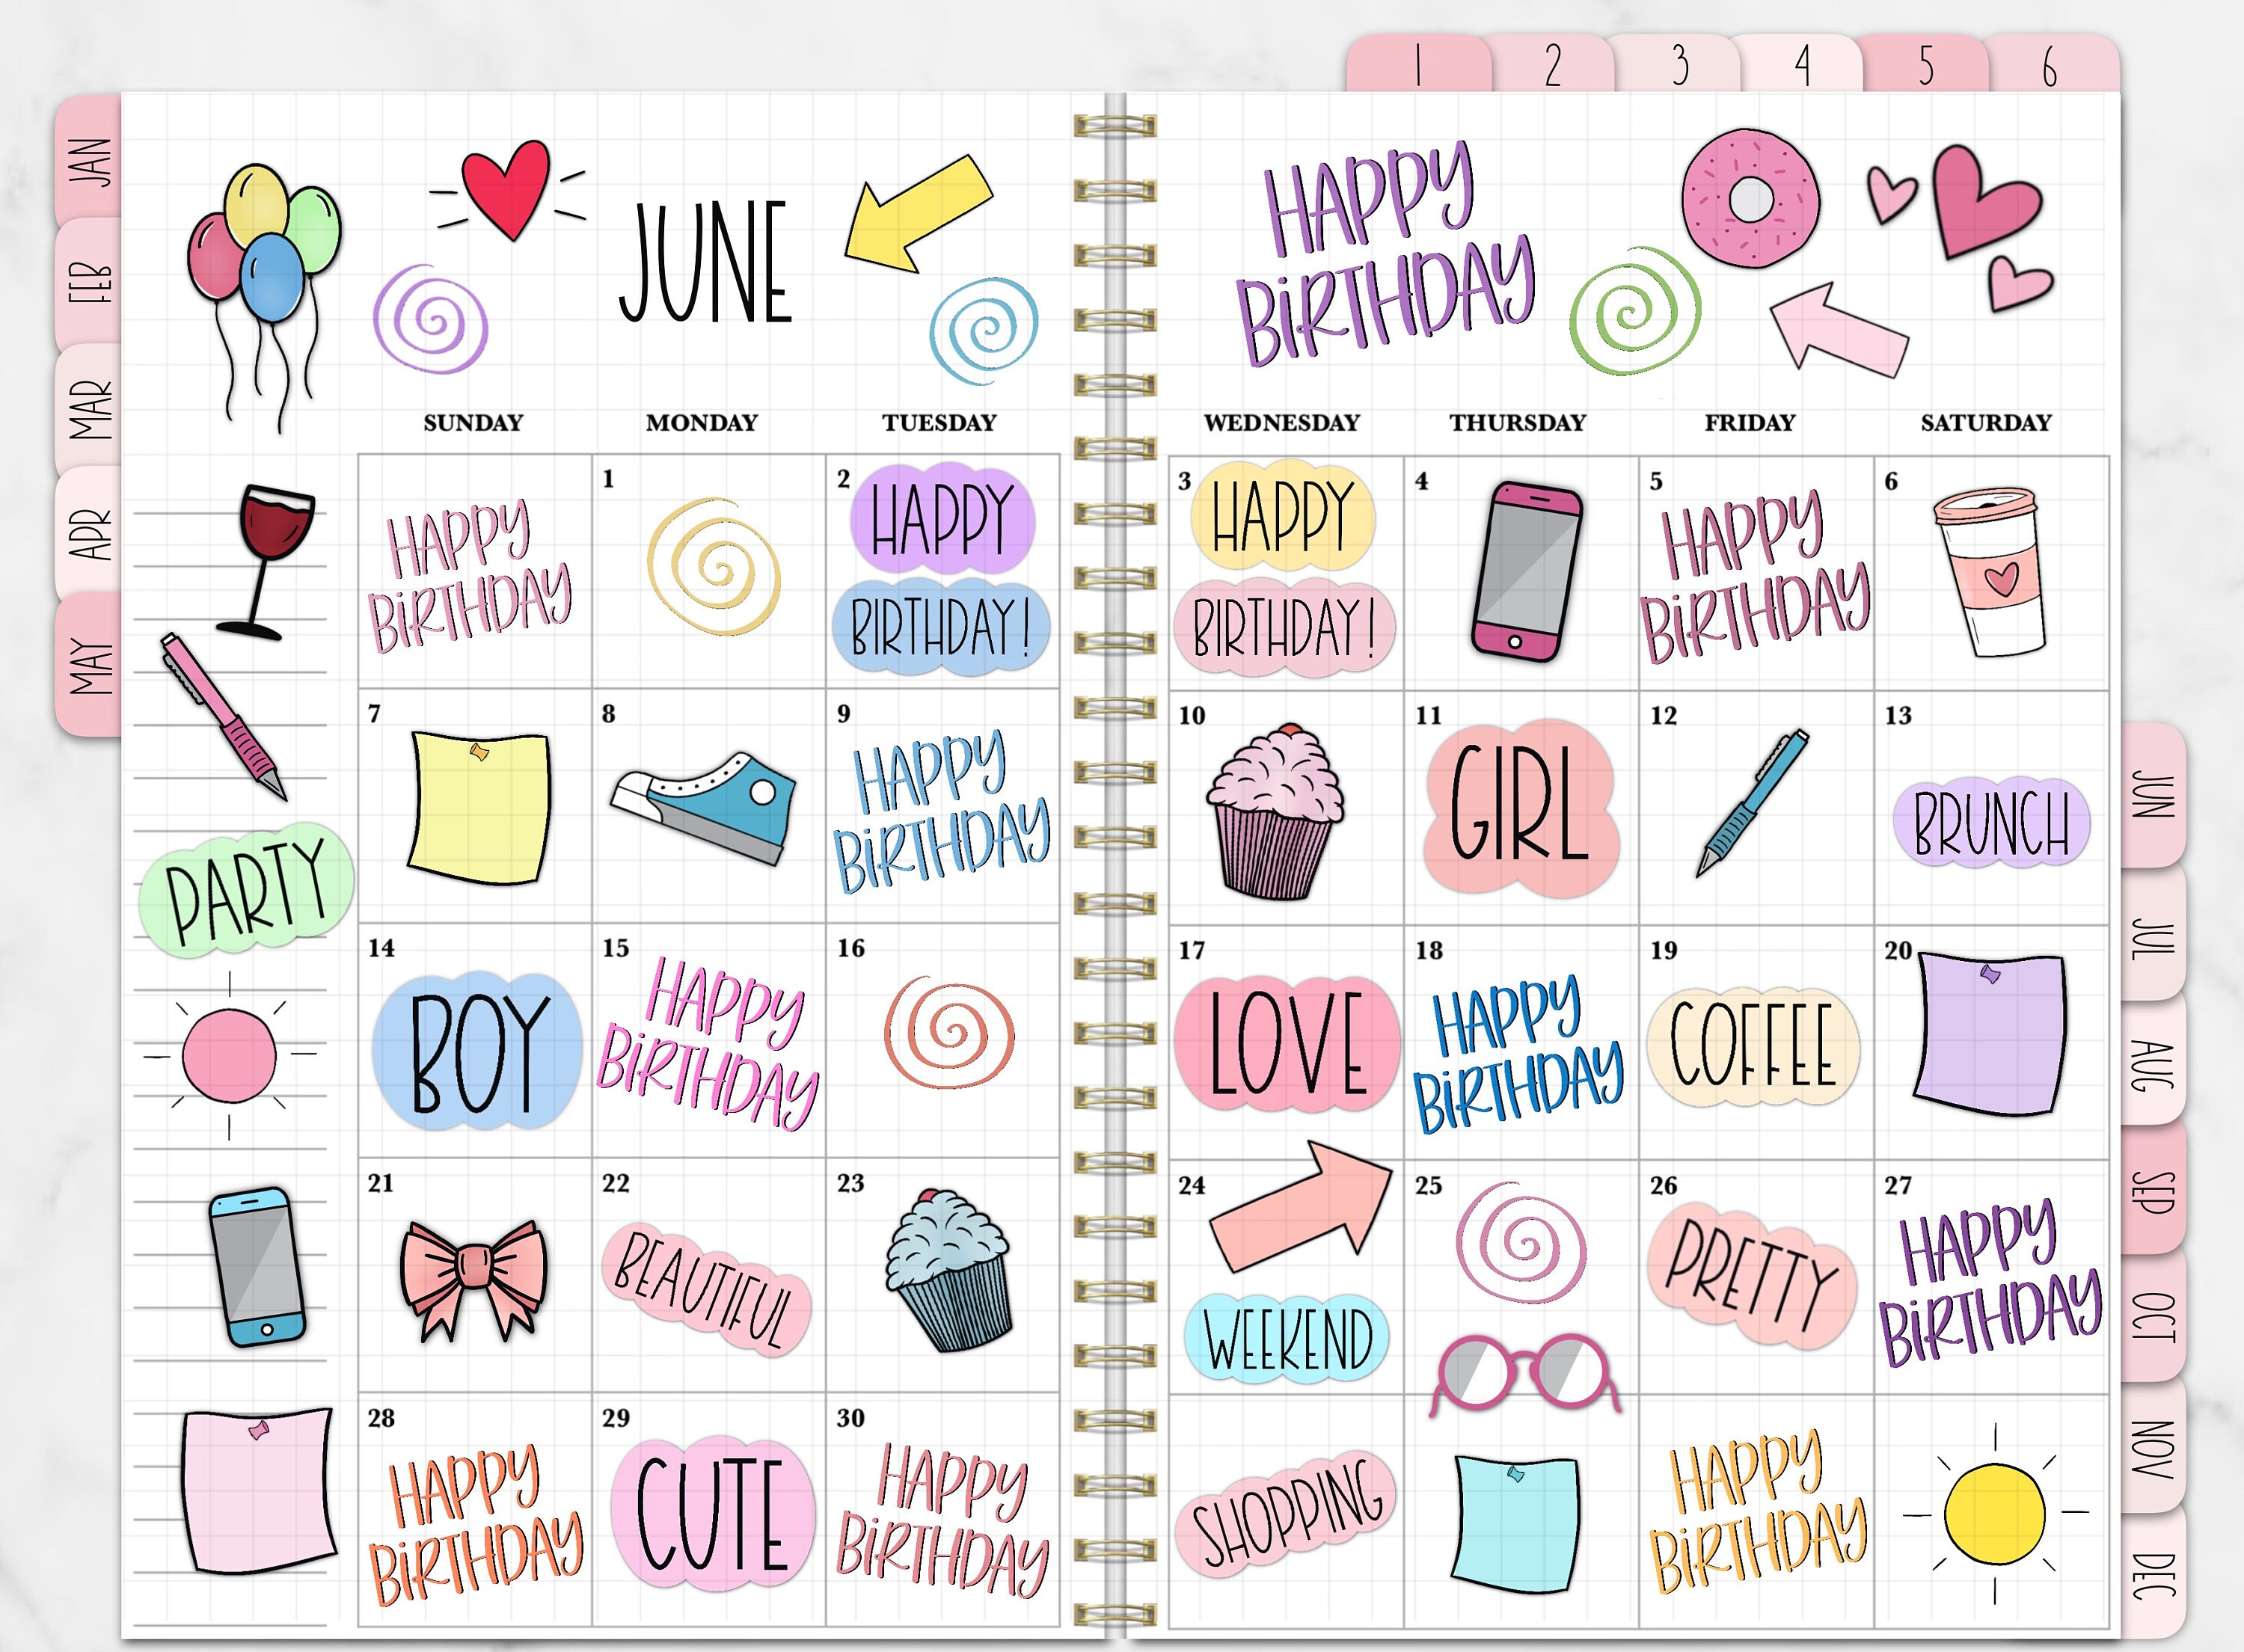 27pcs Cake Party Birthday Stickers For Laptop Scrapbook Ipad Phone